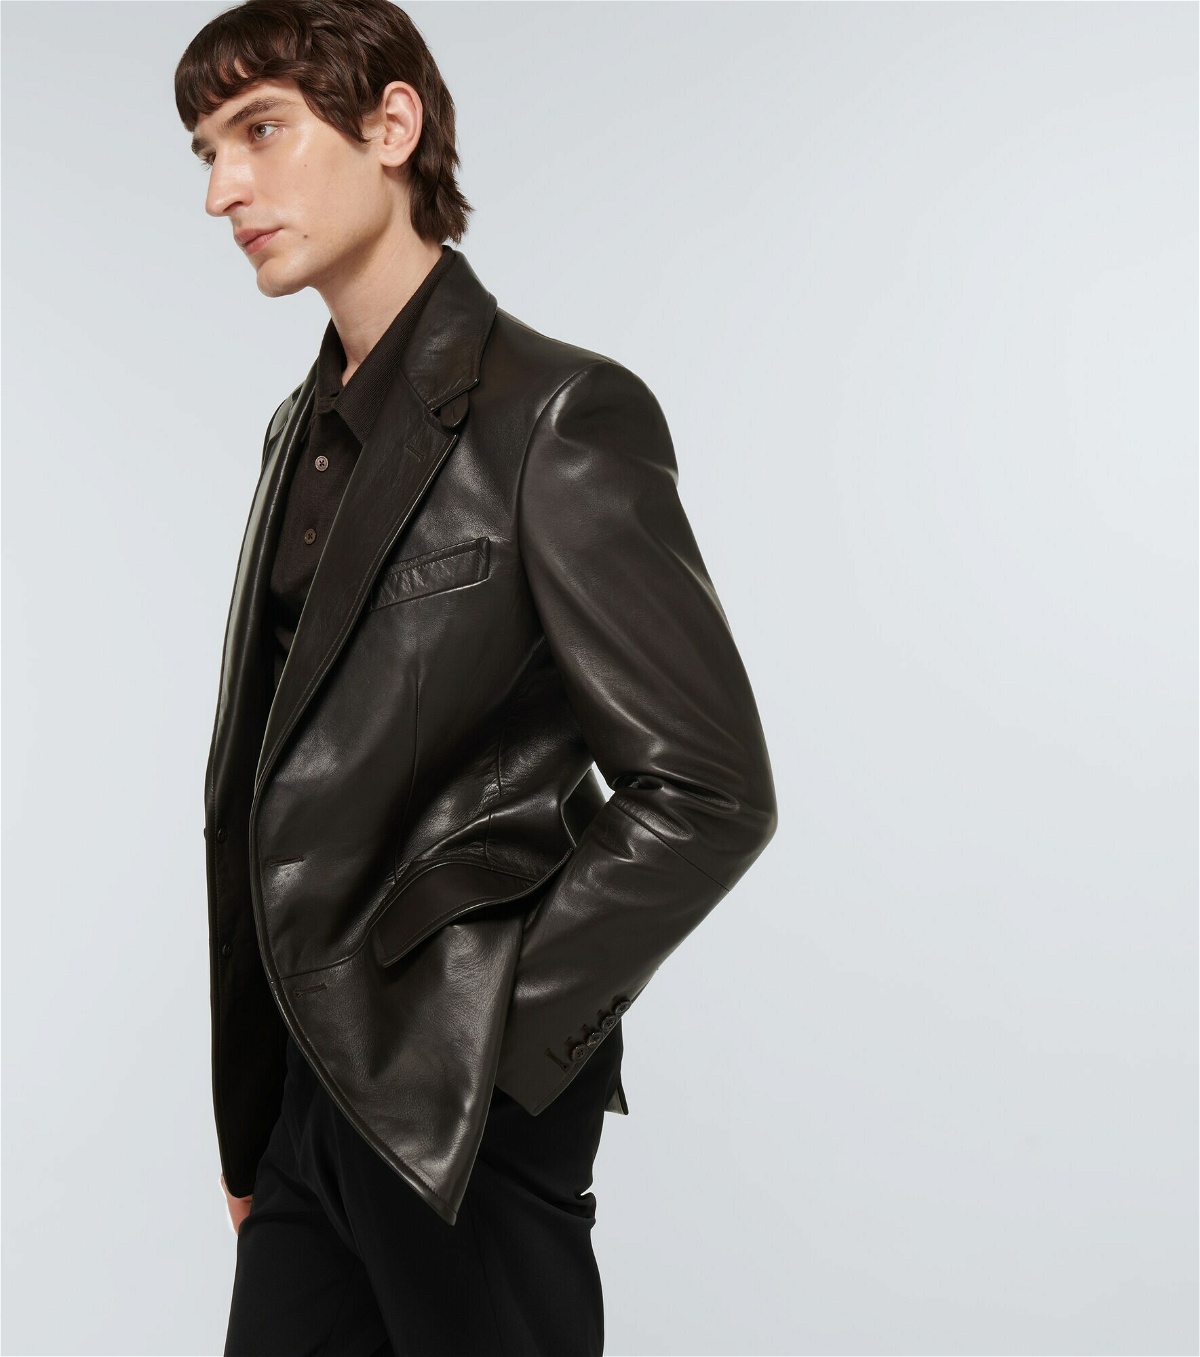 Tom Ford - Single-breasted leather blazer TOM FORD